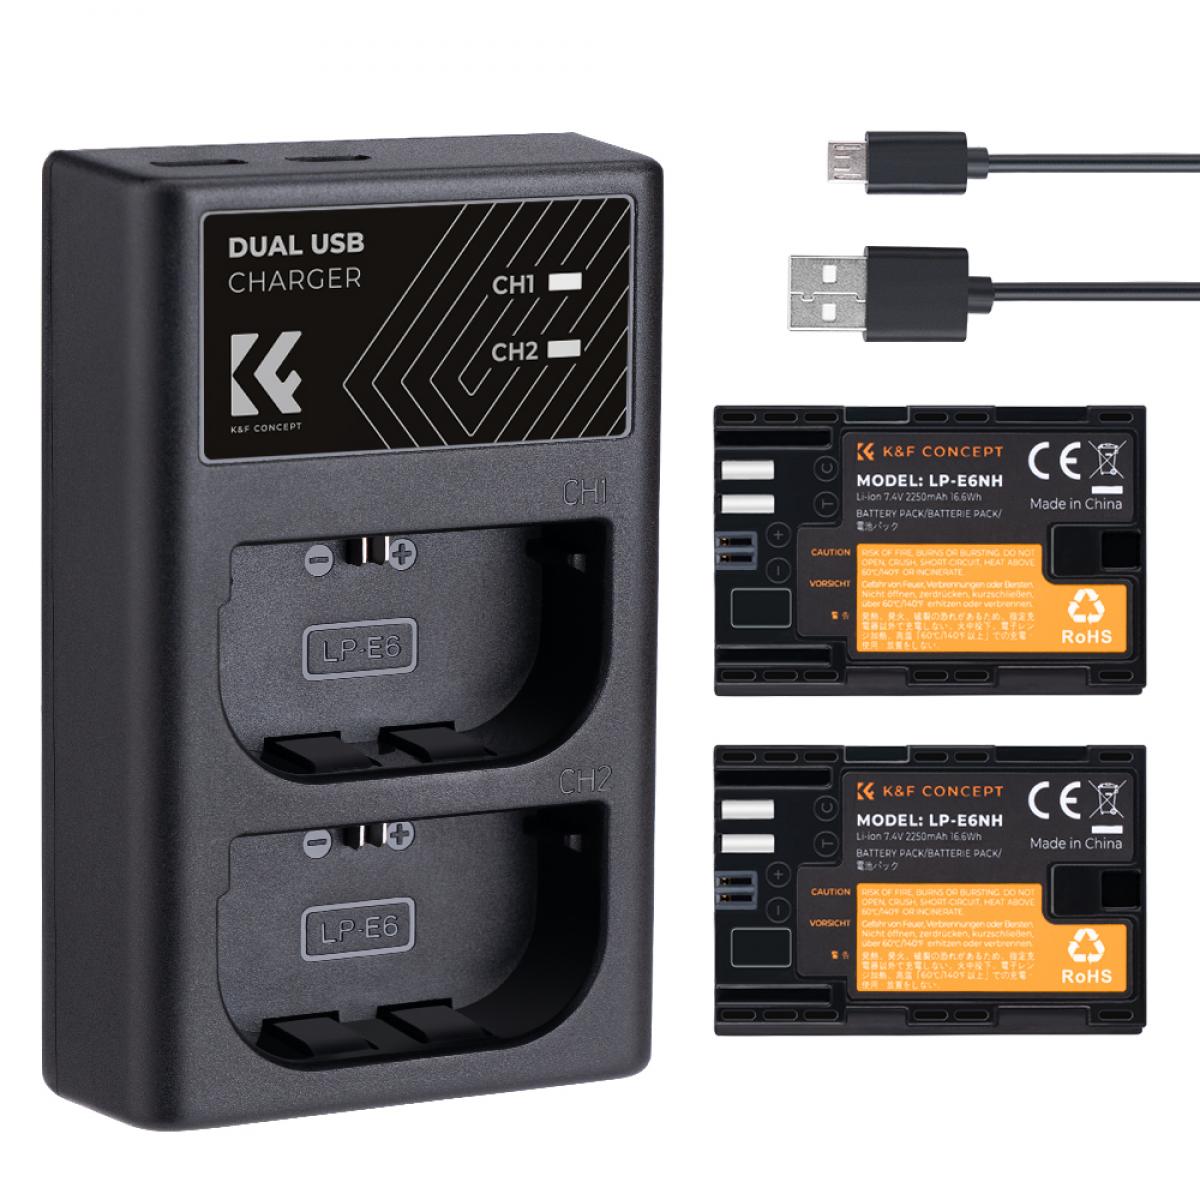 Product Image of K&F Concept LP-E6NH canon battery 2-pack dual slot battery charger kit KF28.0021